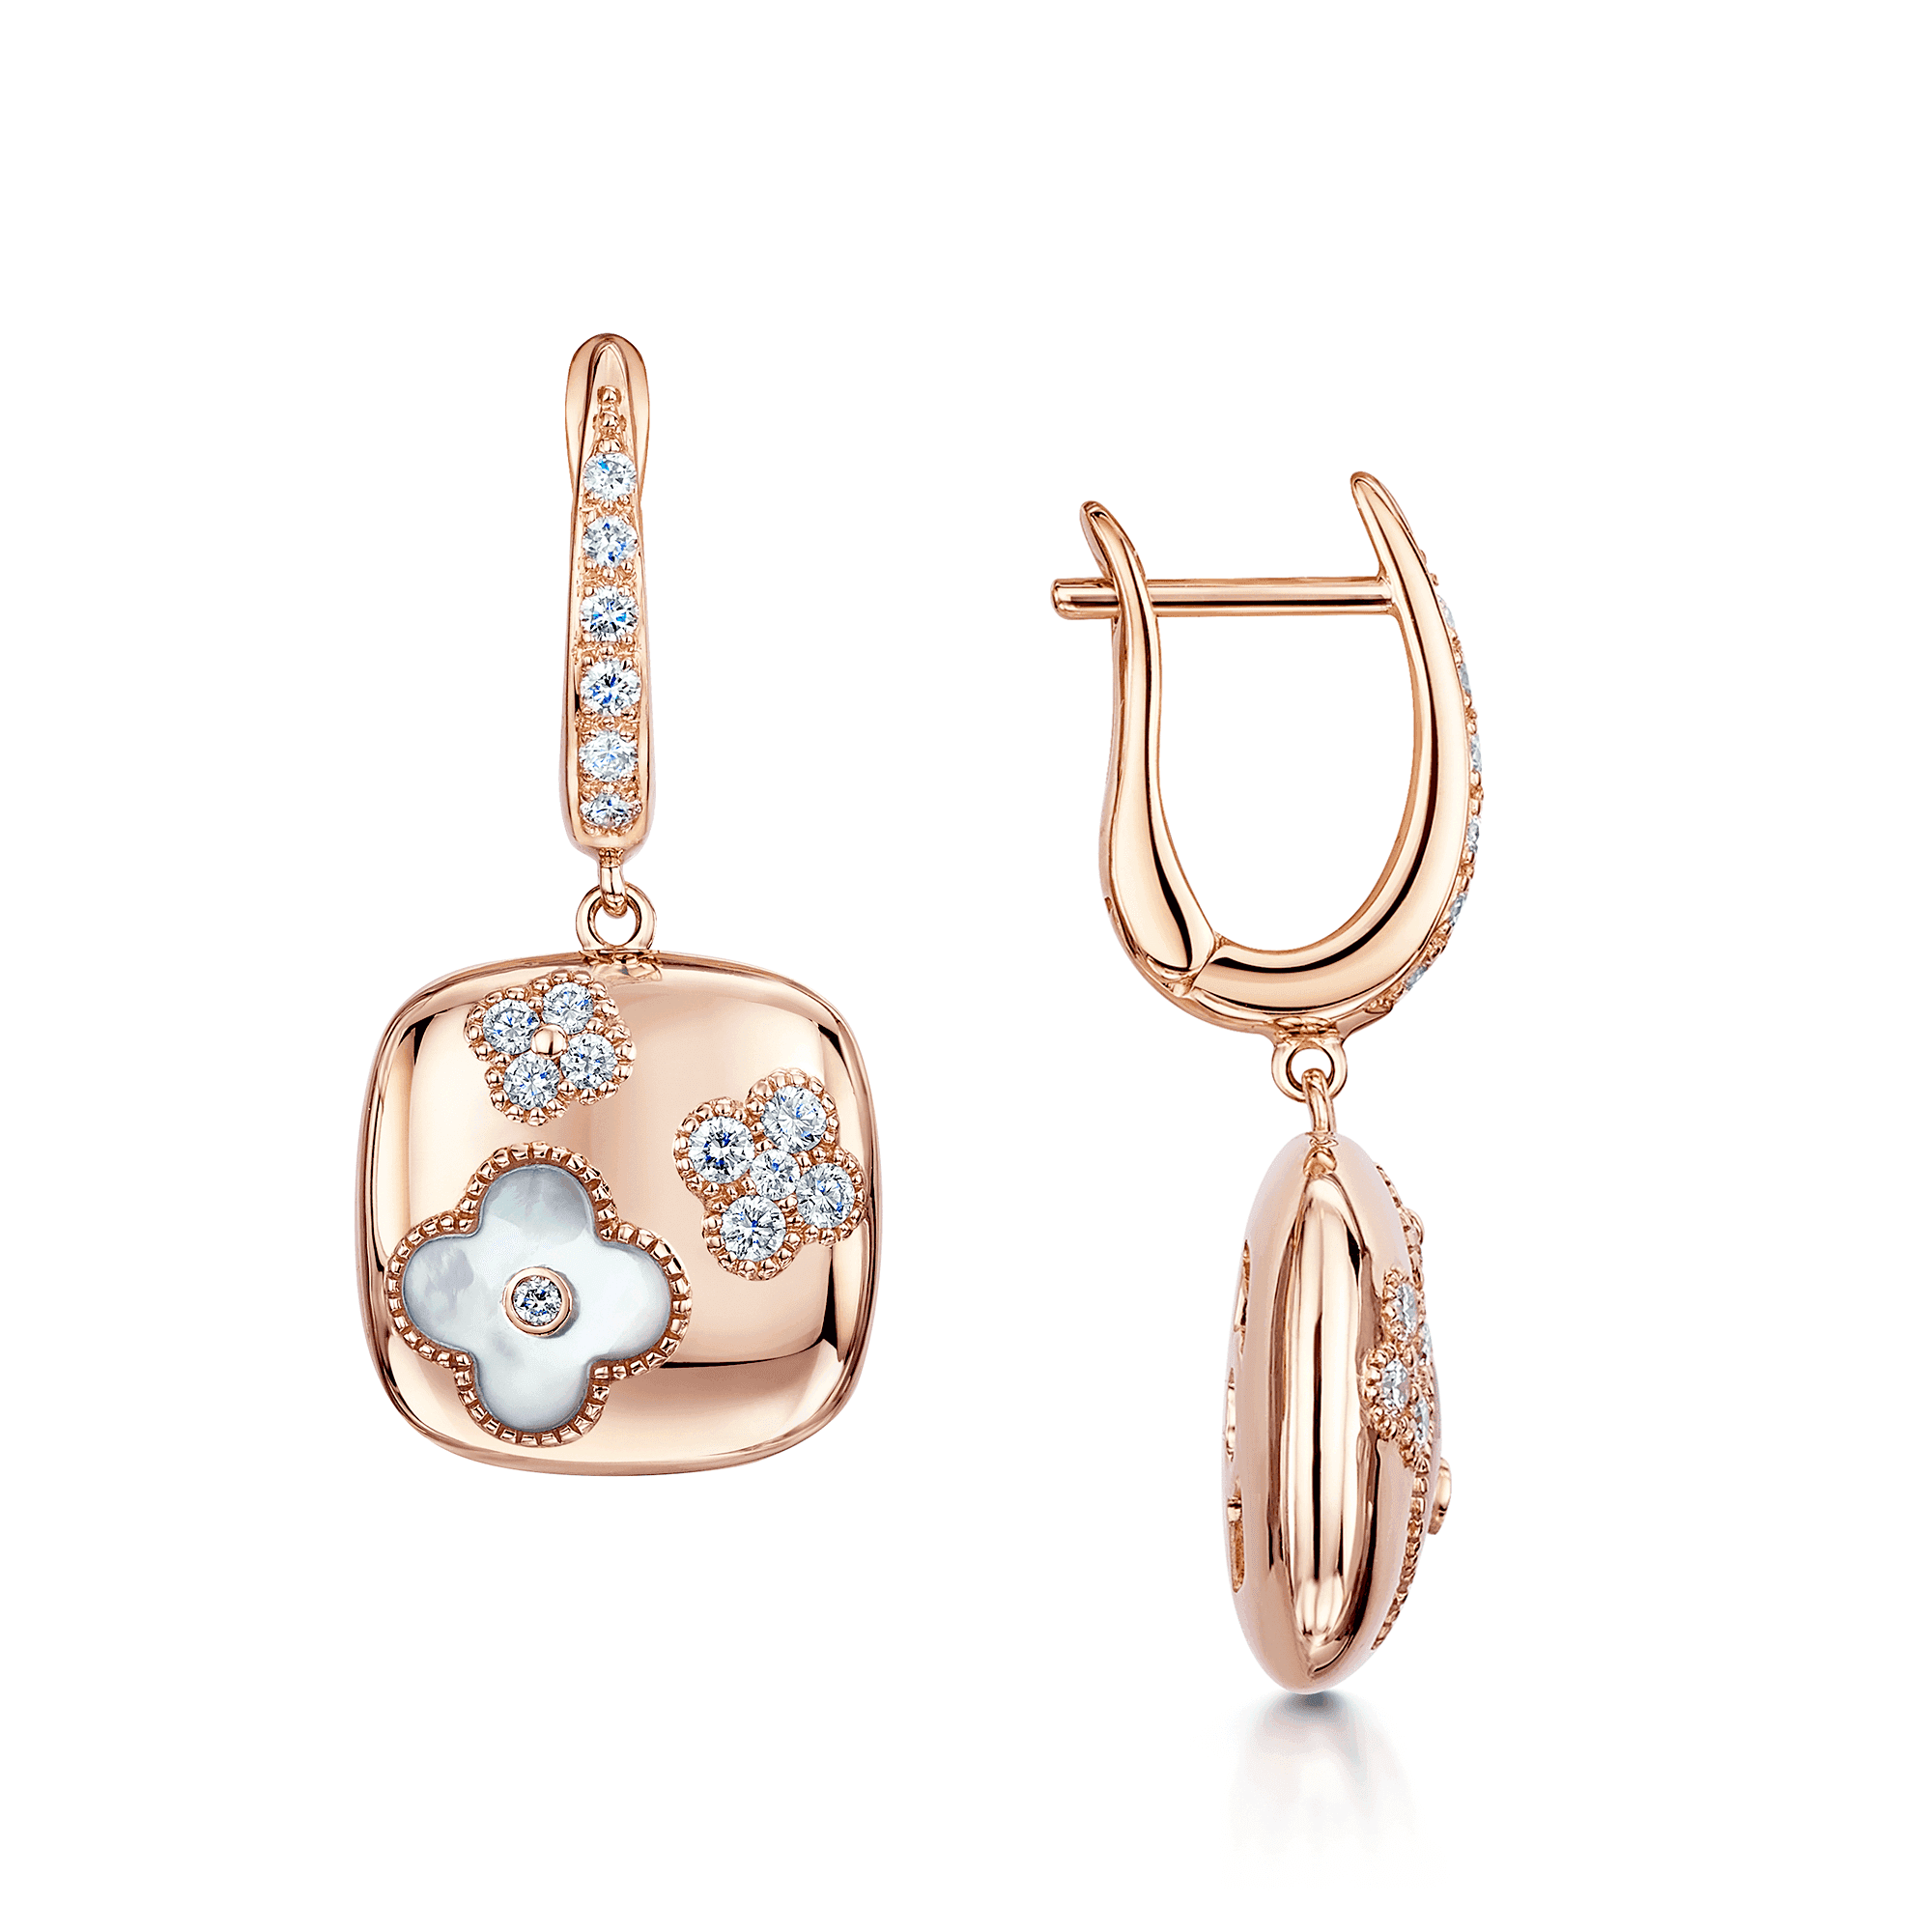 18ct Rose Gold Square Flower Diamond And Mother Of Pearl Drop Earrings With A Diamond Hoop